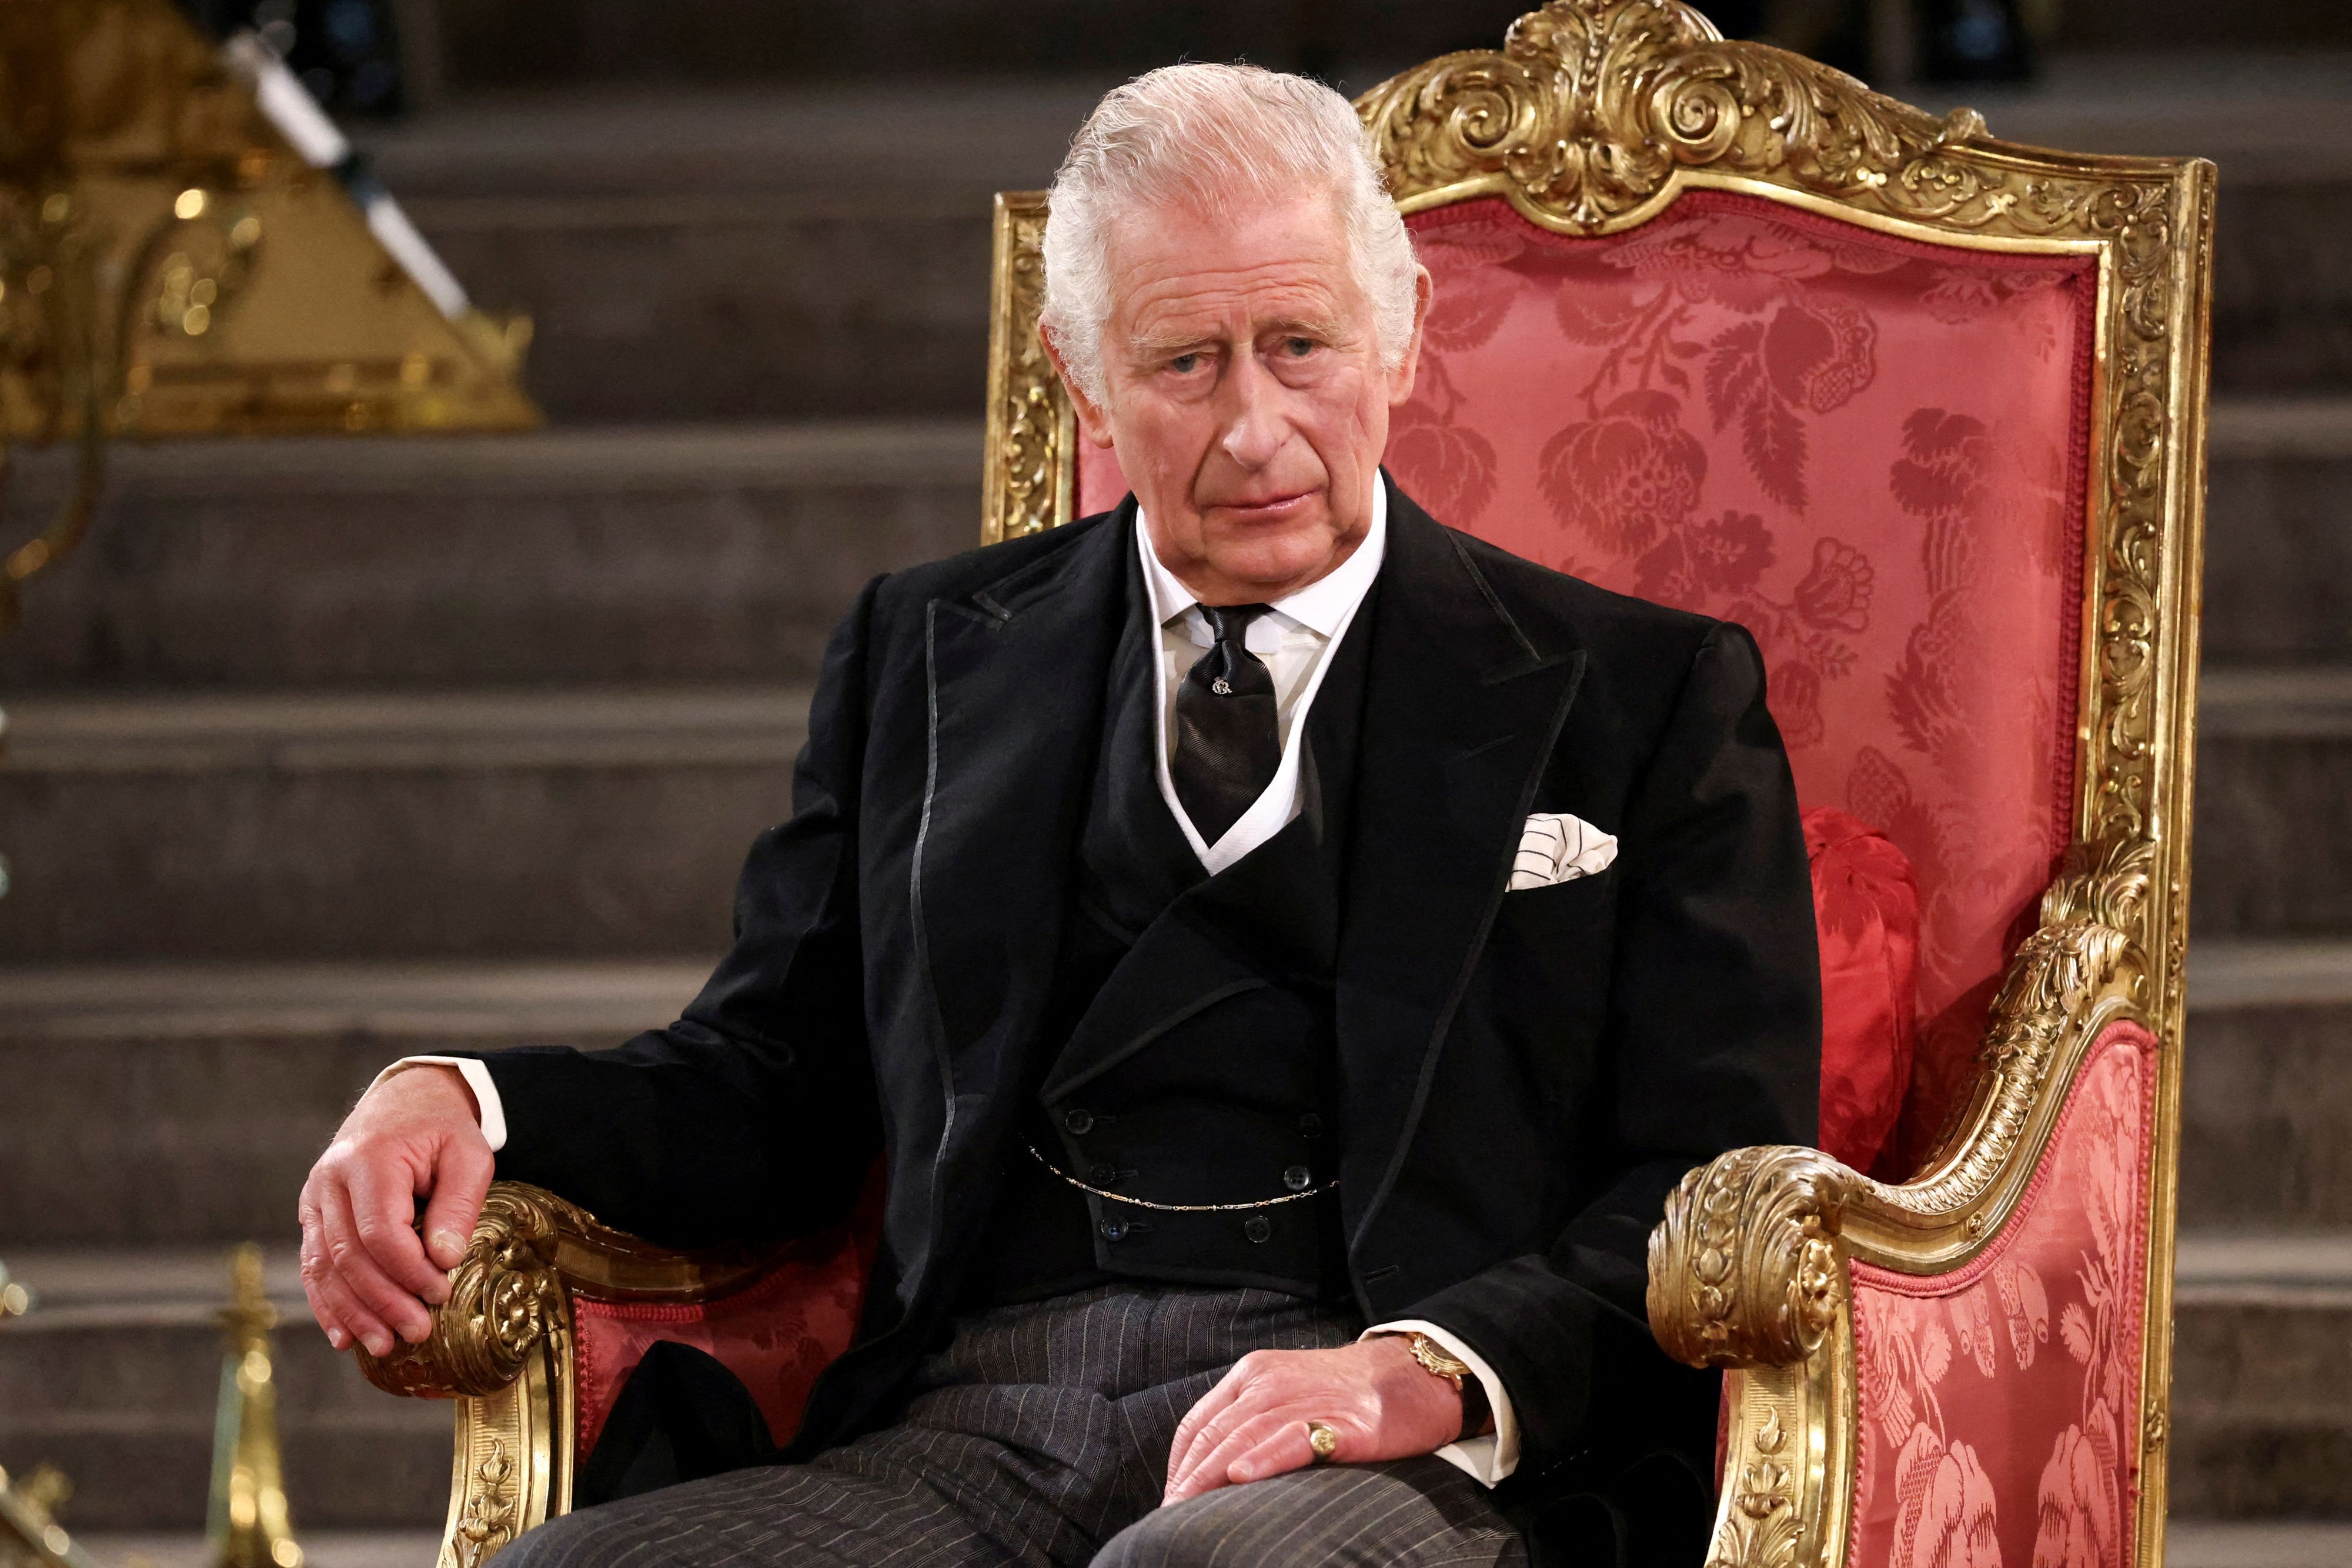 King Charles III attends the presentation of Addresses by both Houses of Parliament in Westminster Hall, inside the Palace of Westminster on September 12, 2022, central London, England. | Source: Getty Images